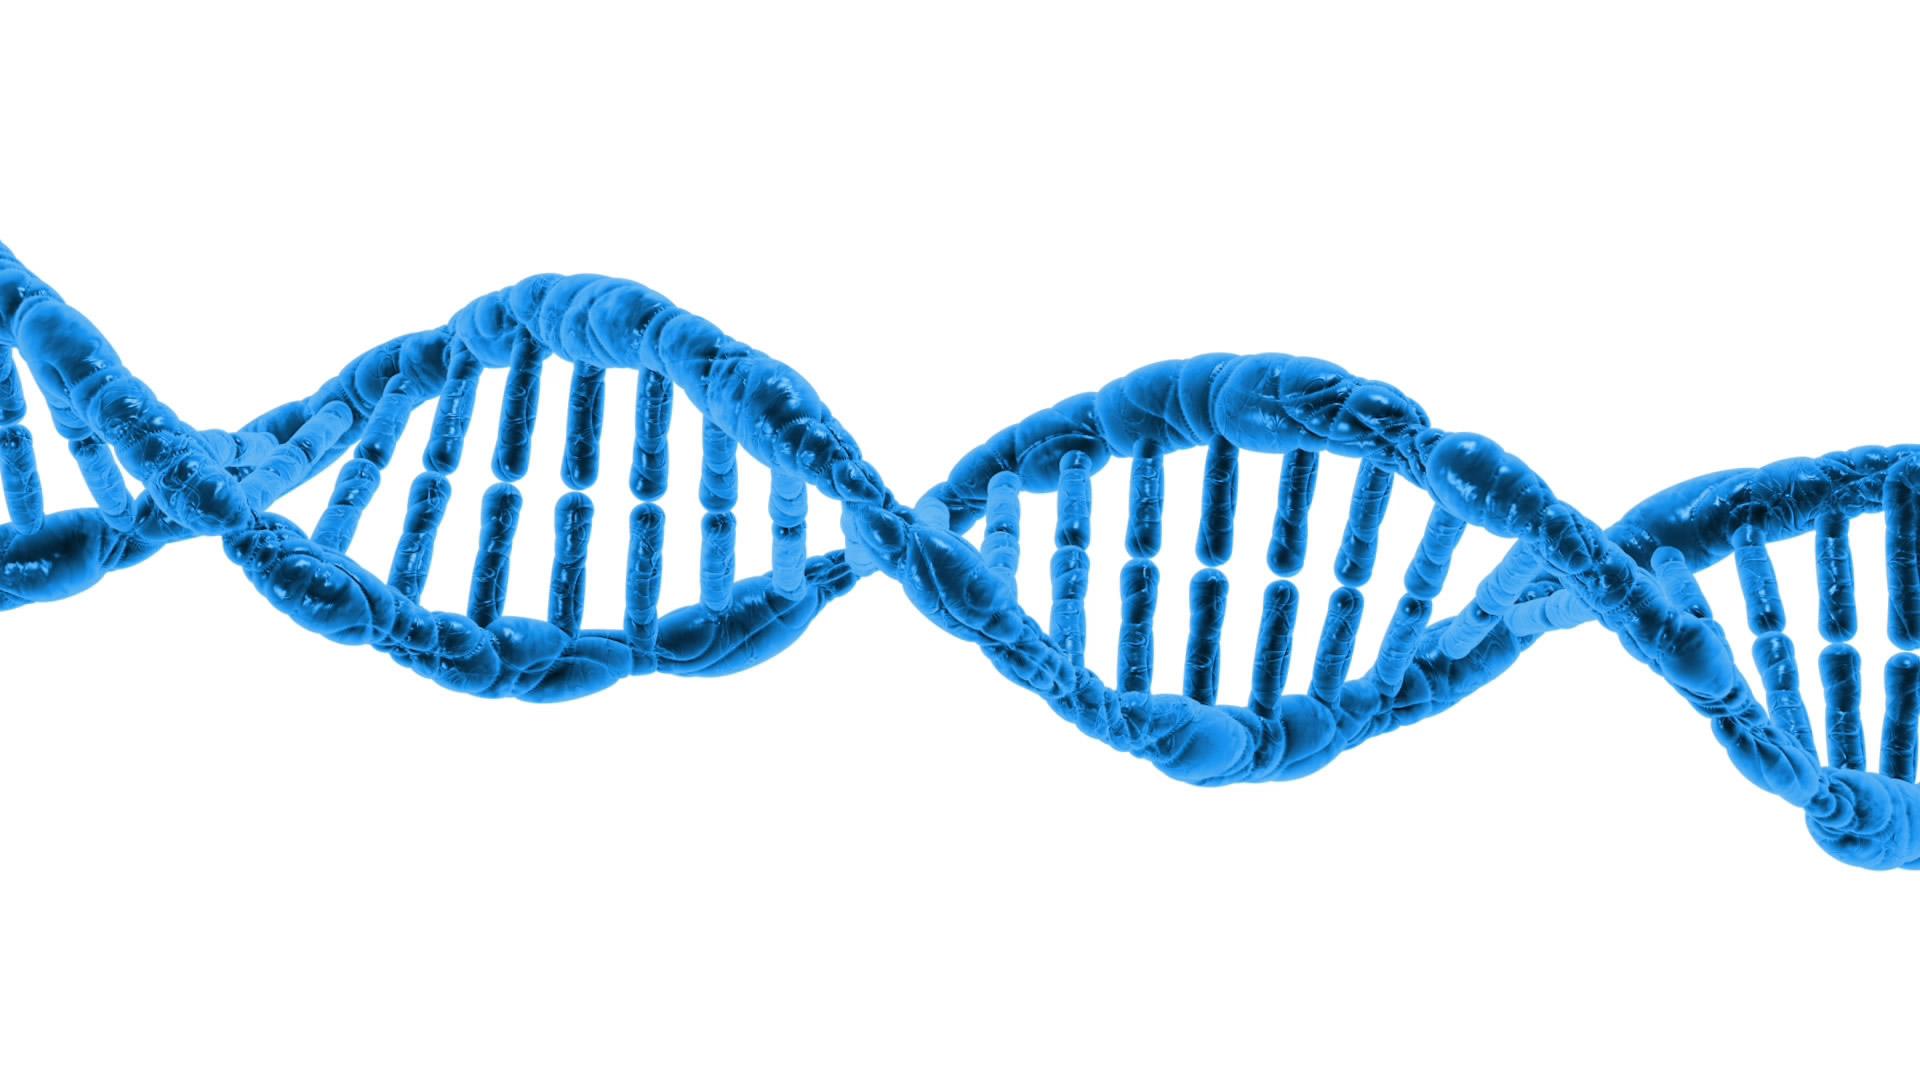 dna-stock-image